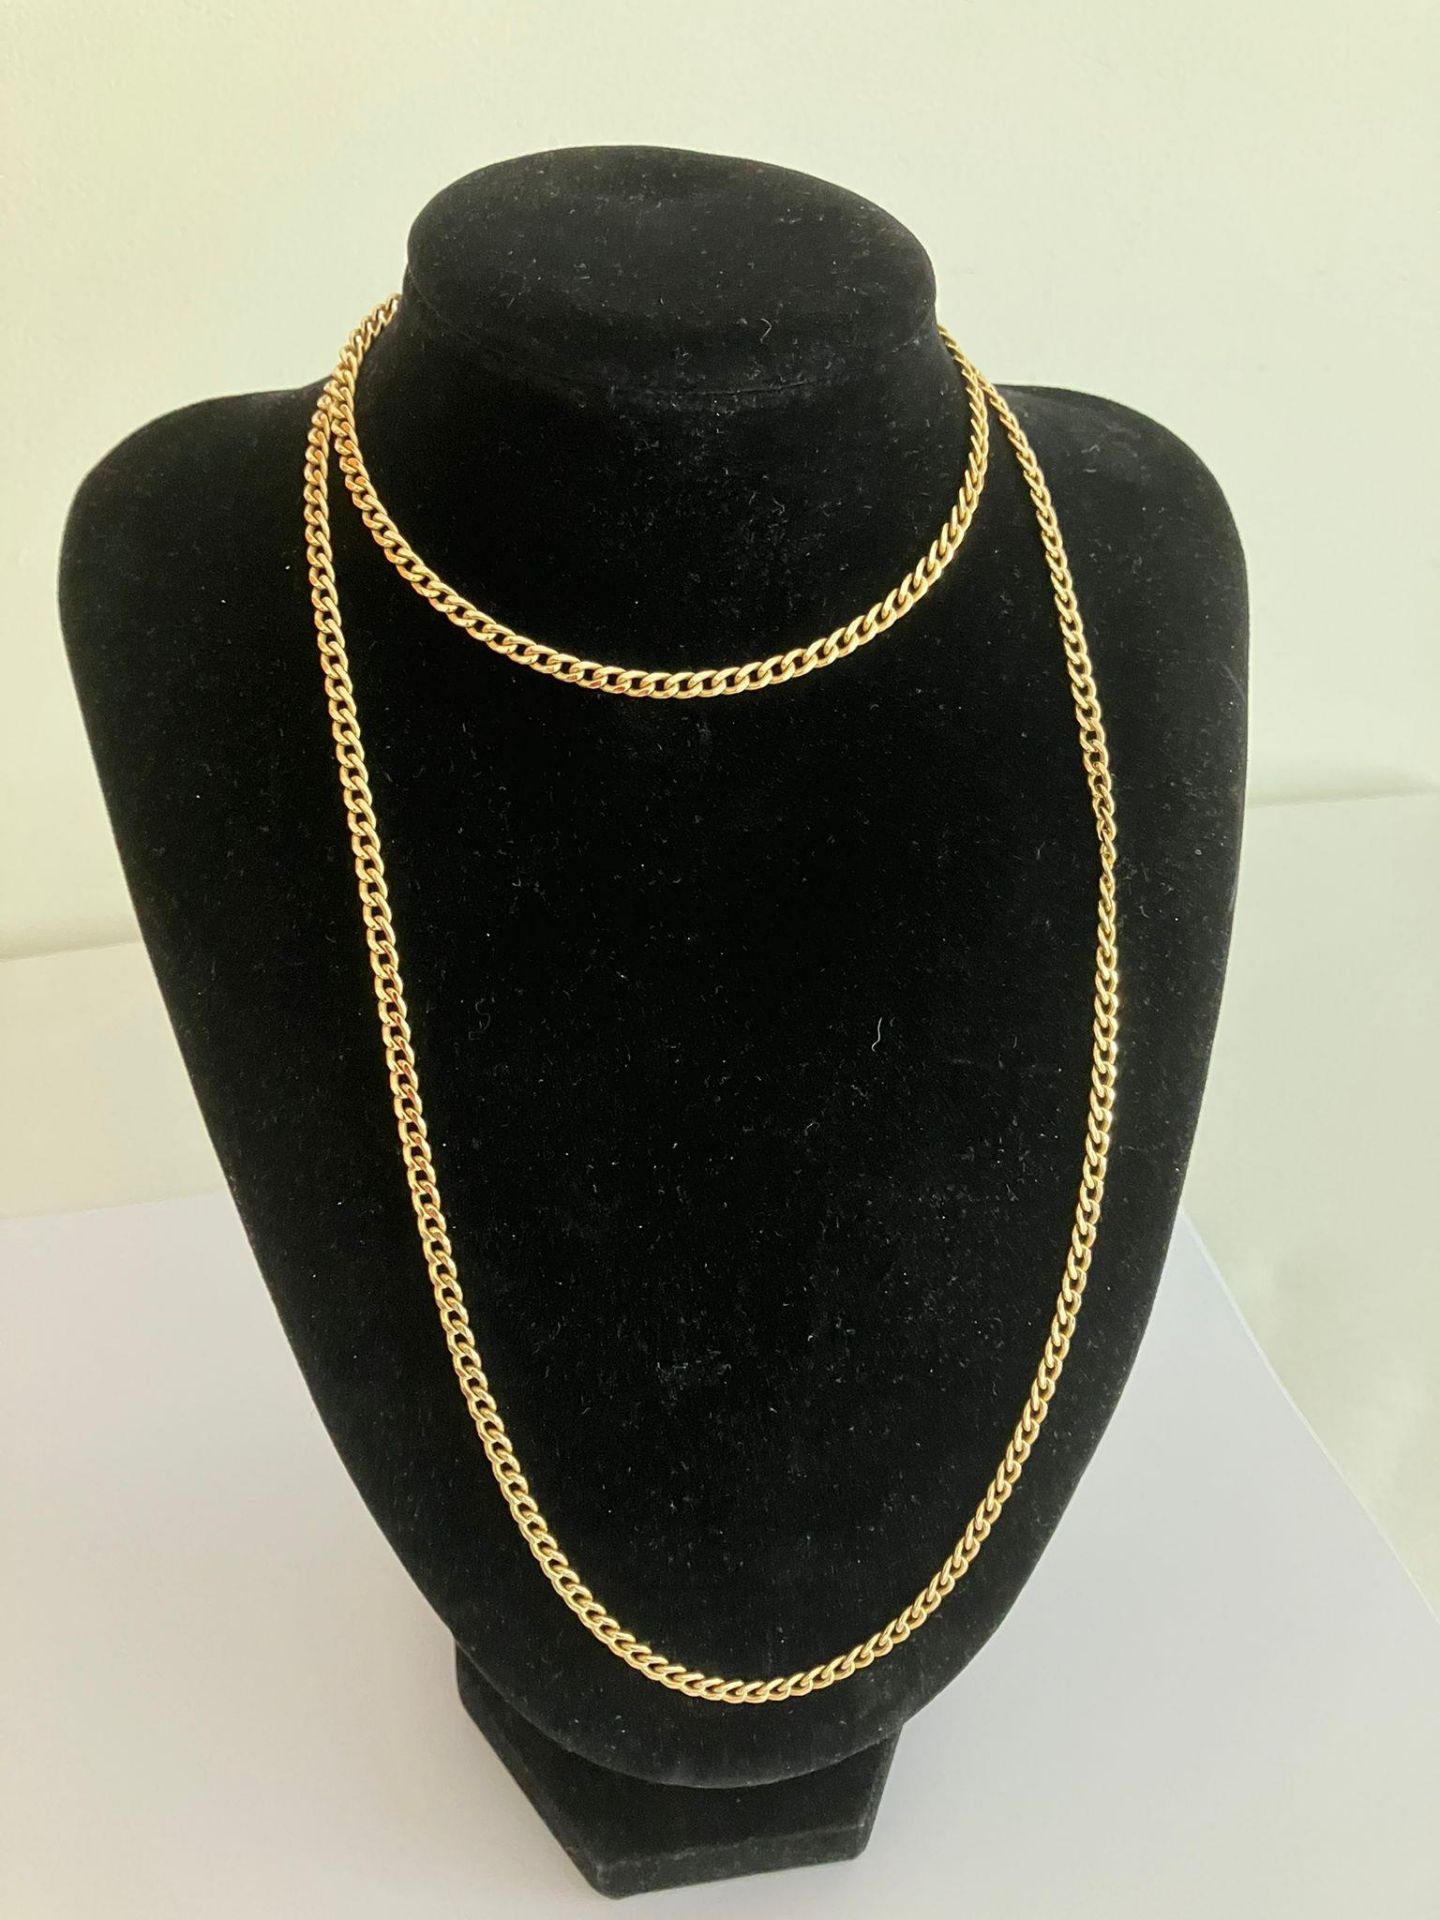 Extra long 9 carat GOLD Curb Chain Necklace. 80 cm long in hallmarked yellow gold. 9.08 grams.